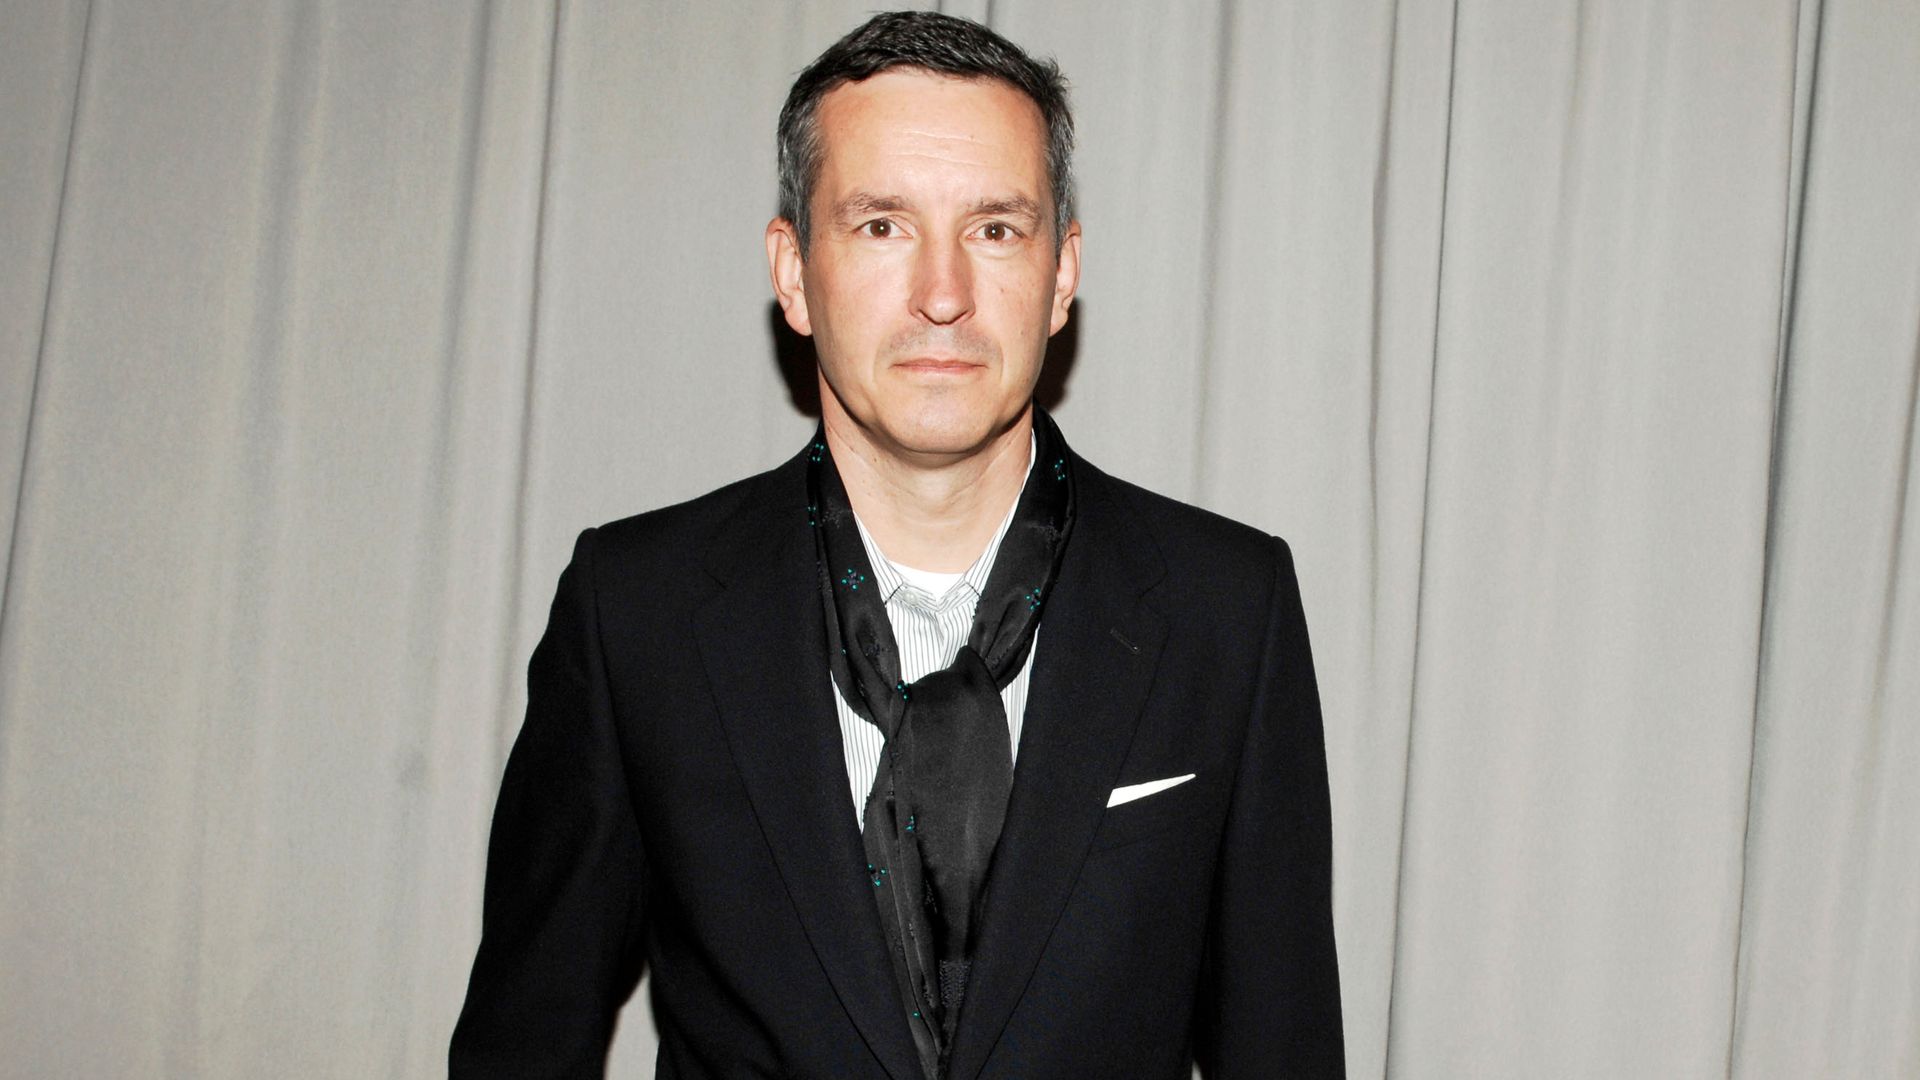 Dries Van Noten bids farewell to his iconic brand to make way for 'new talent'